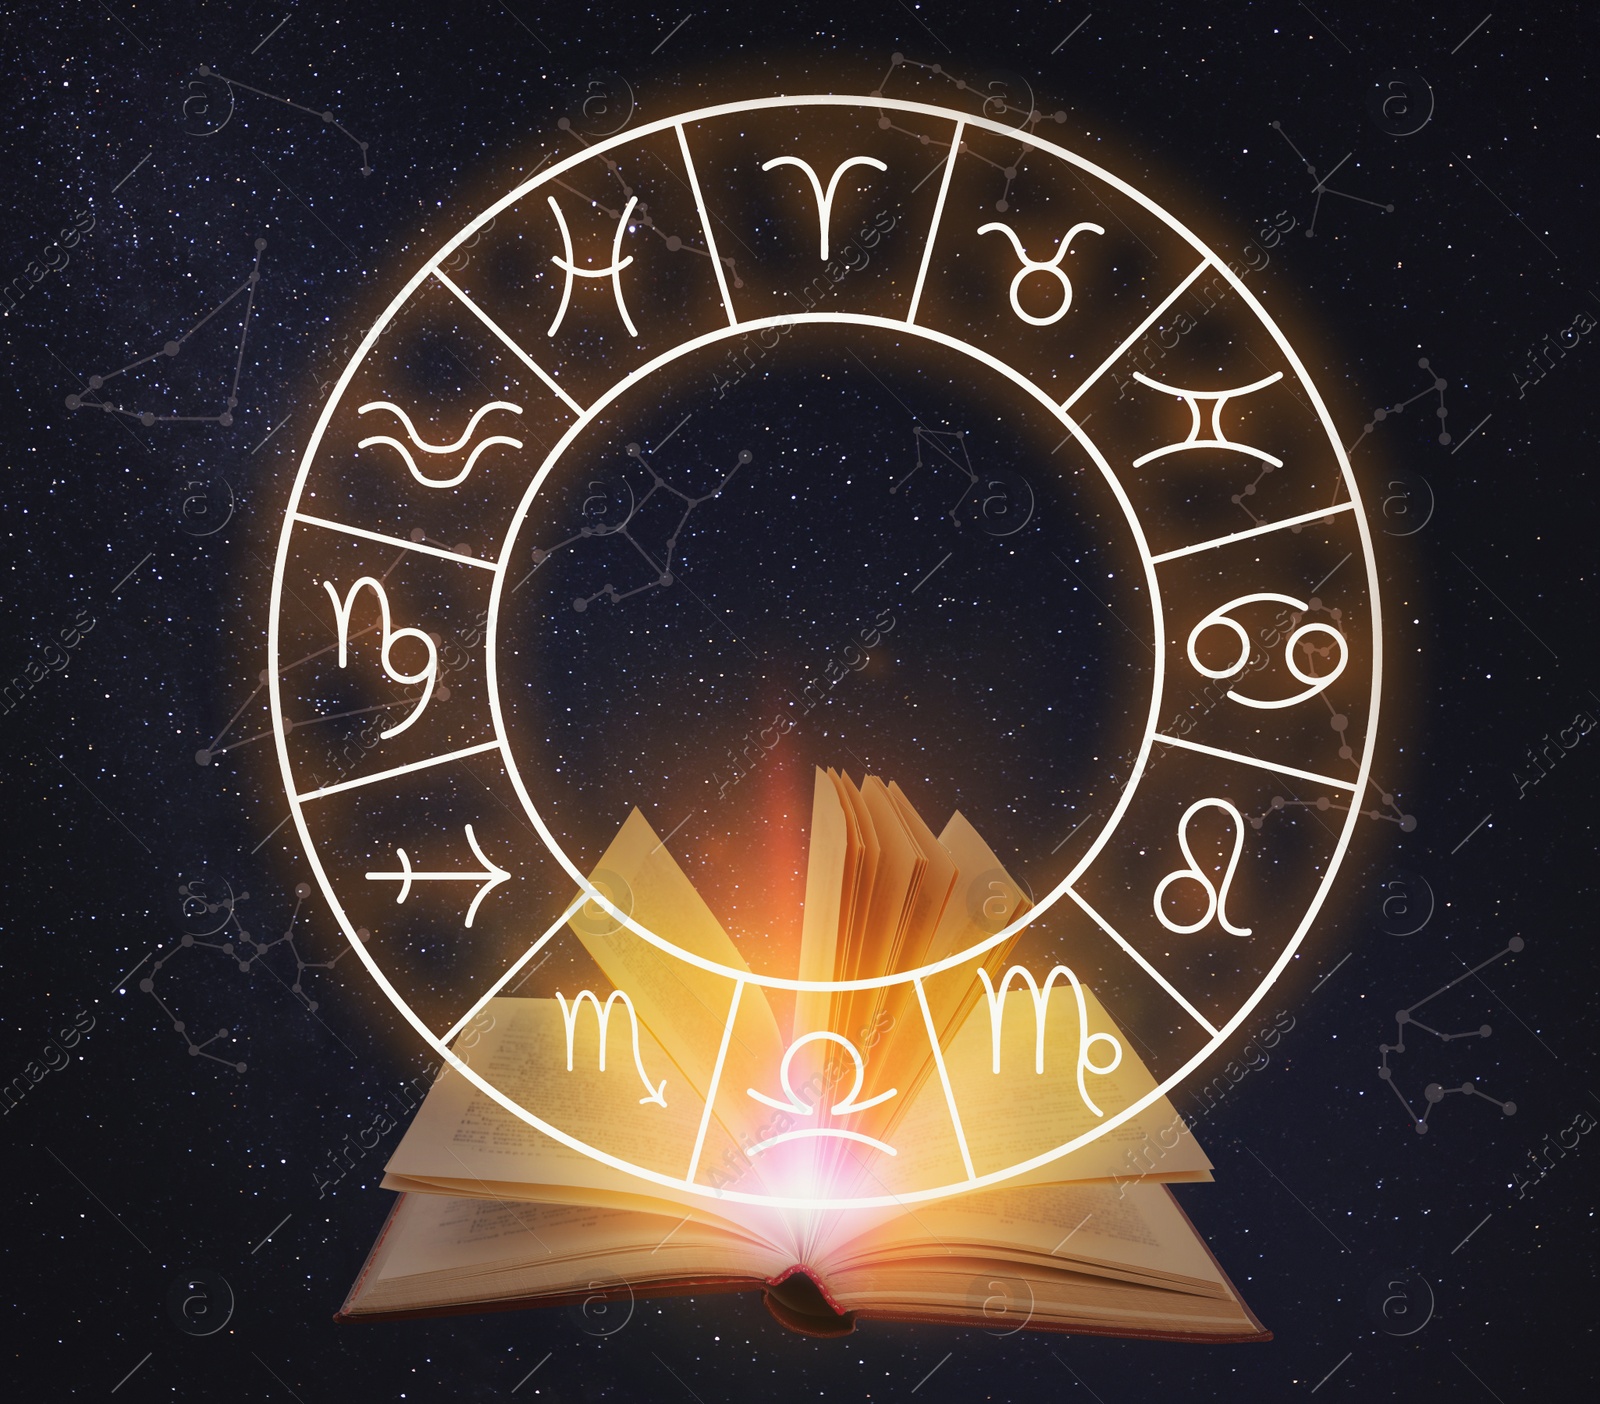 Image of Open book, illustration of zodiac wheel with astrological signs and starry sky at night